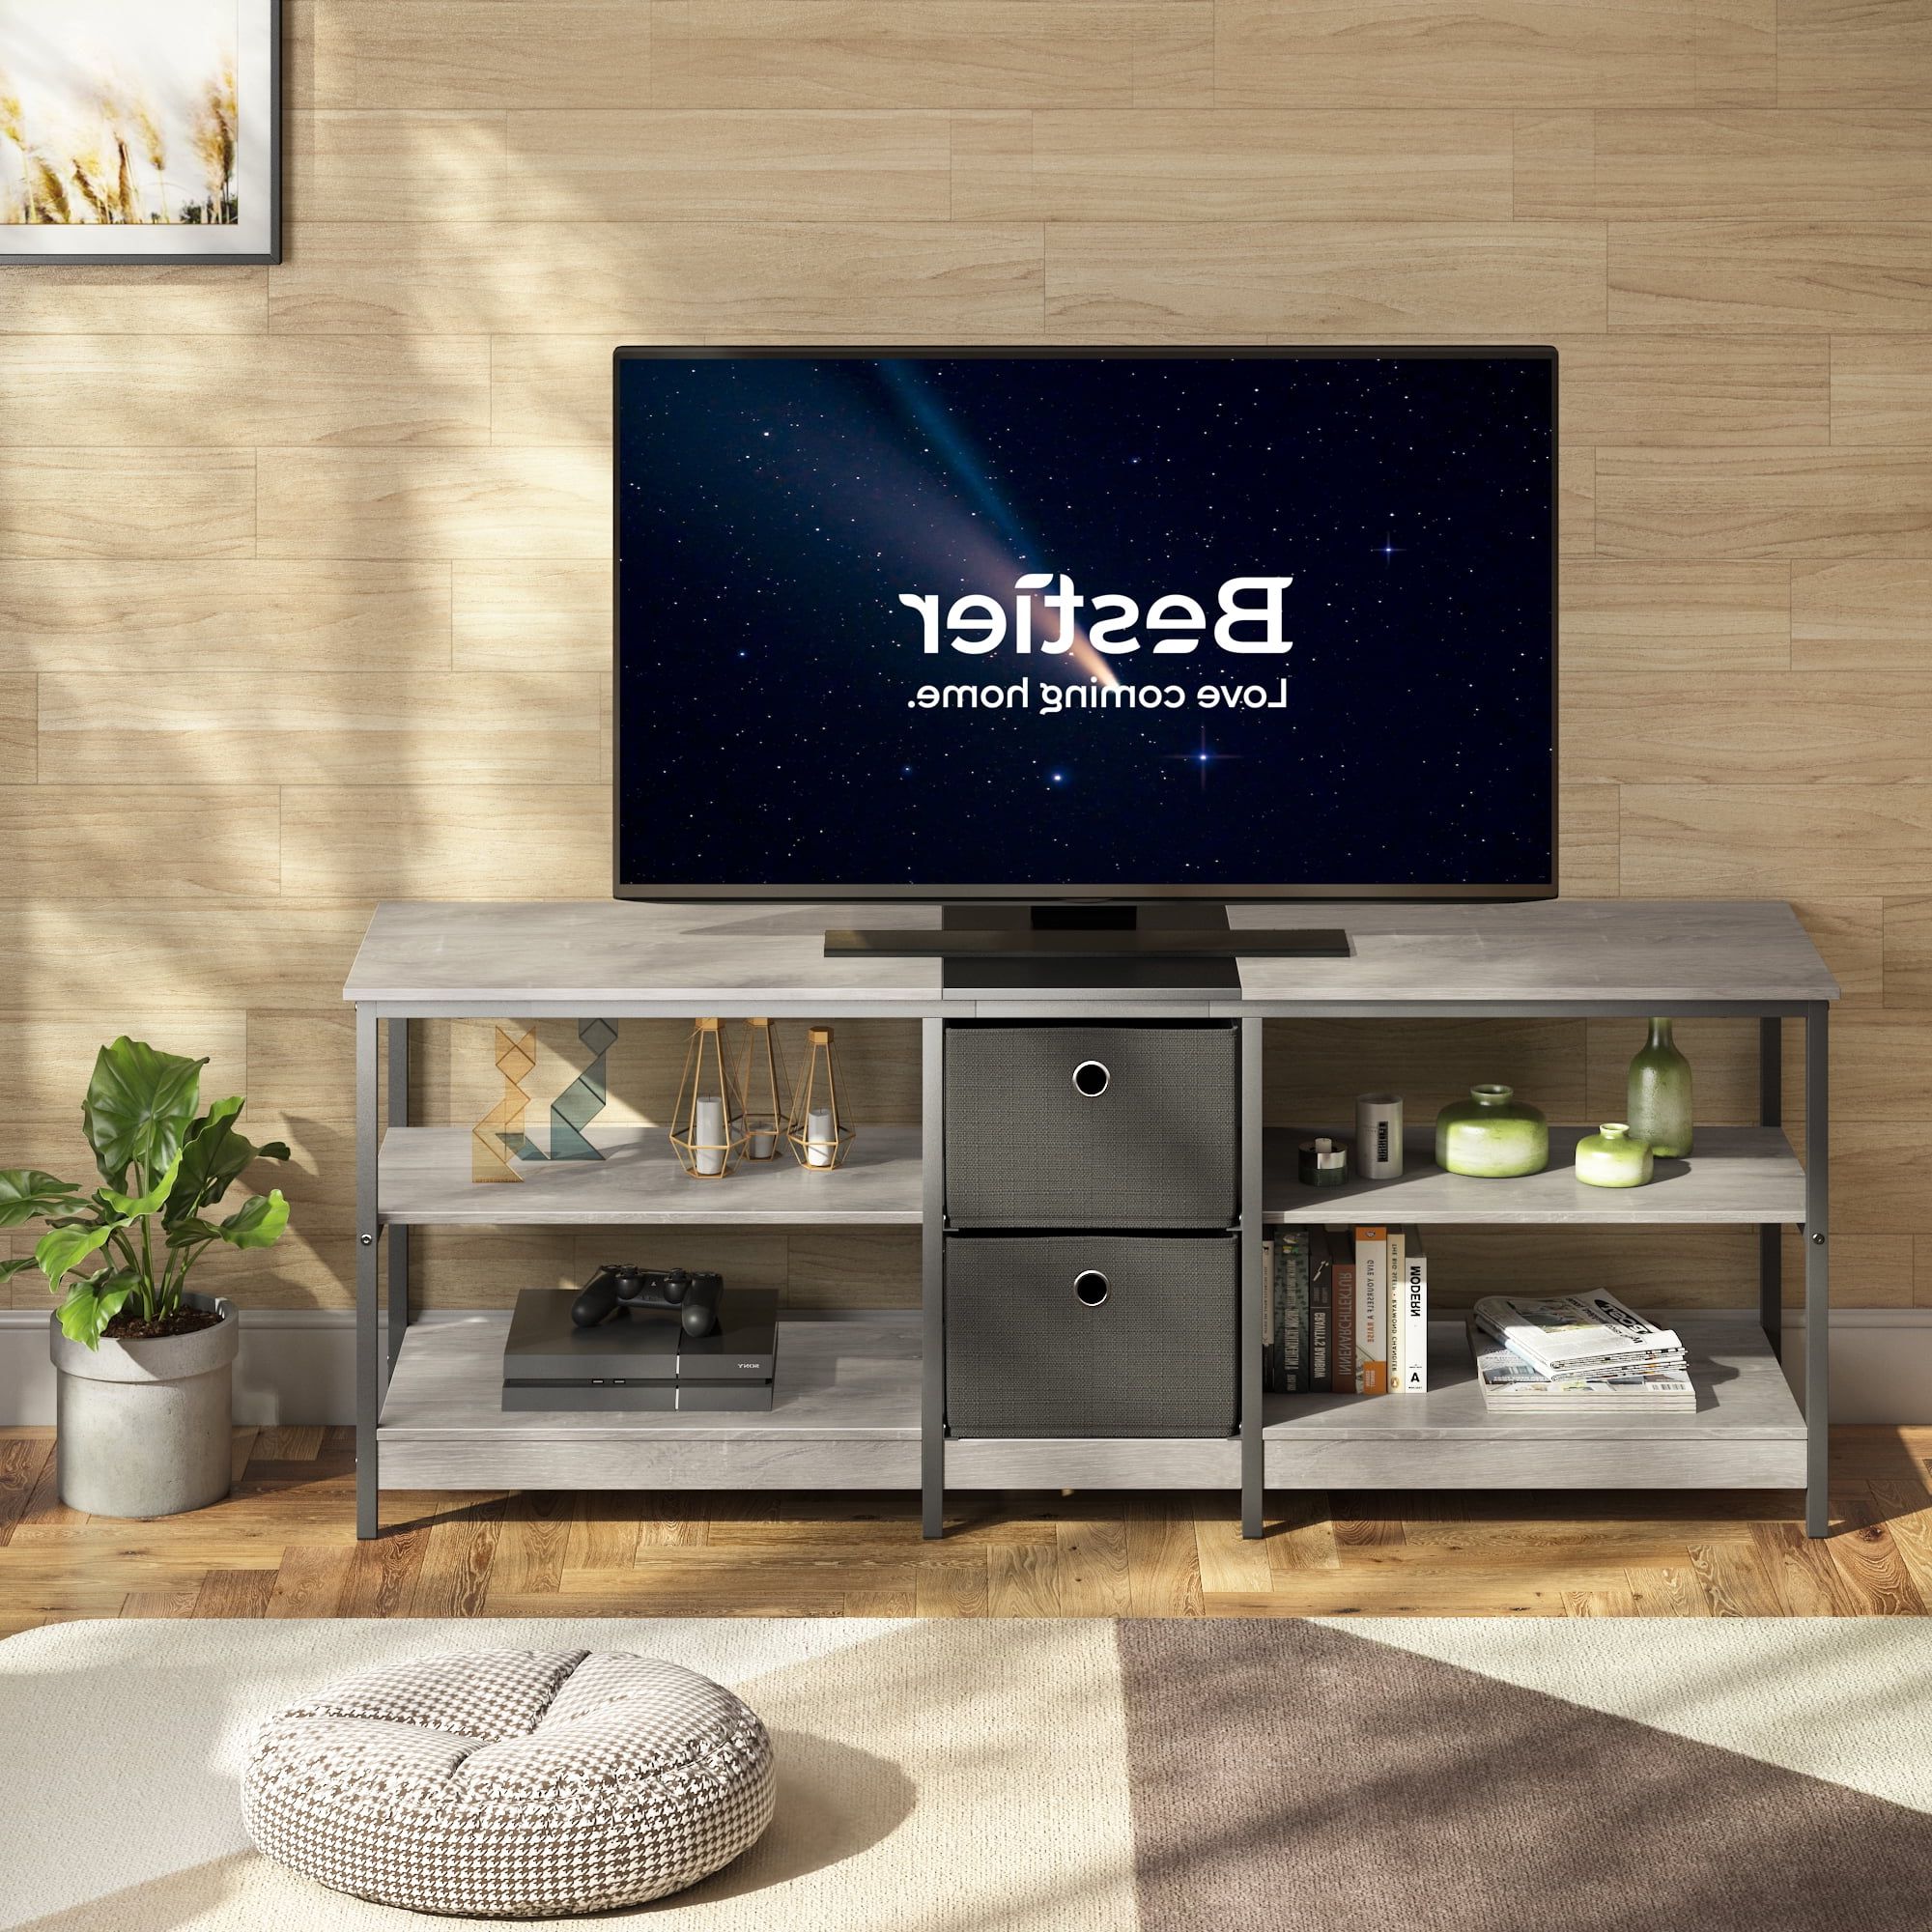 Bestier Farmhouse Entertainment Center Tv Stand With Shelves For Tvs Up With Regard To 2019 Bestier Tv Stand For Tvs Up To 75" (View 13 of 15)